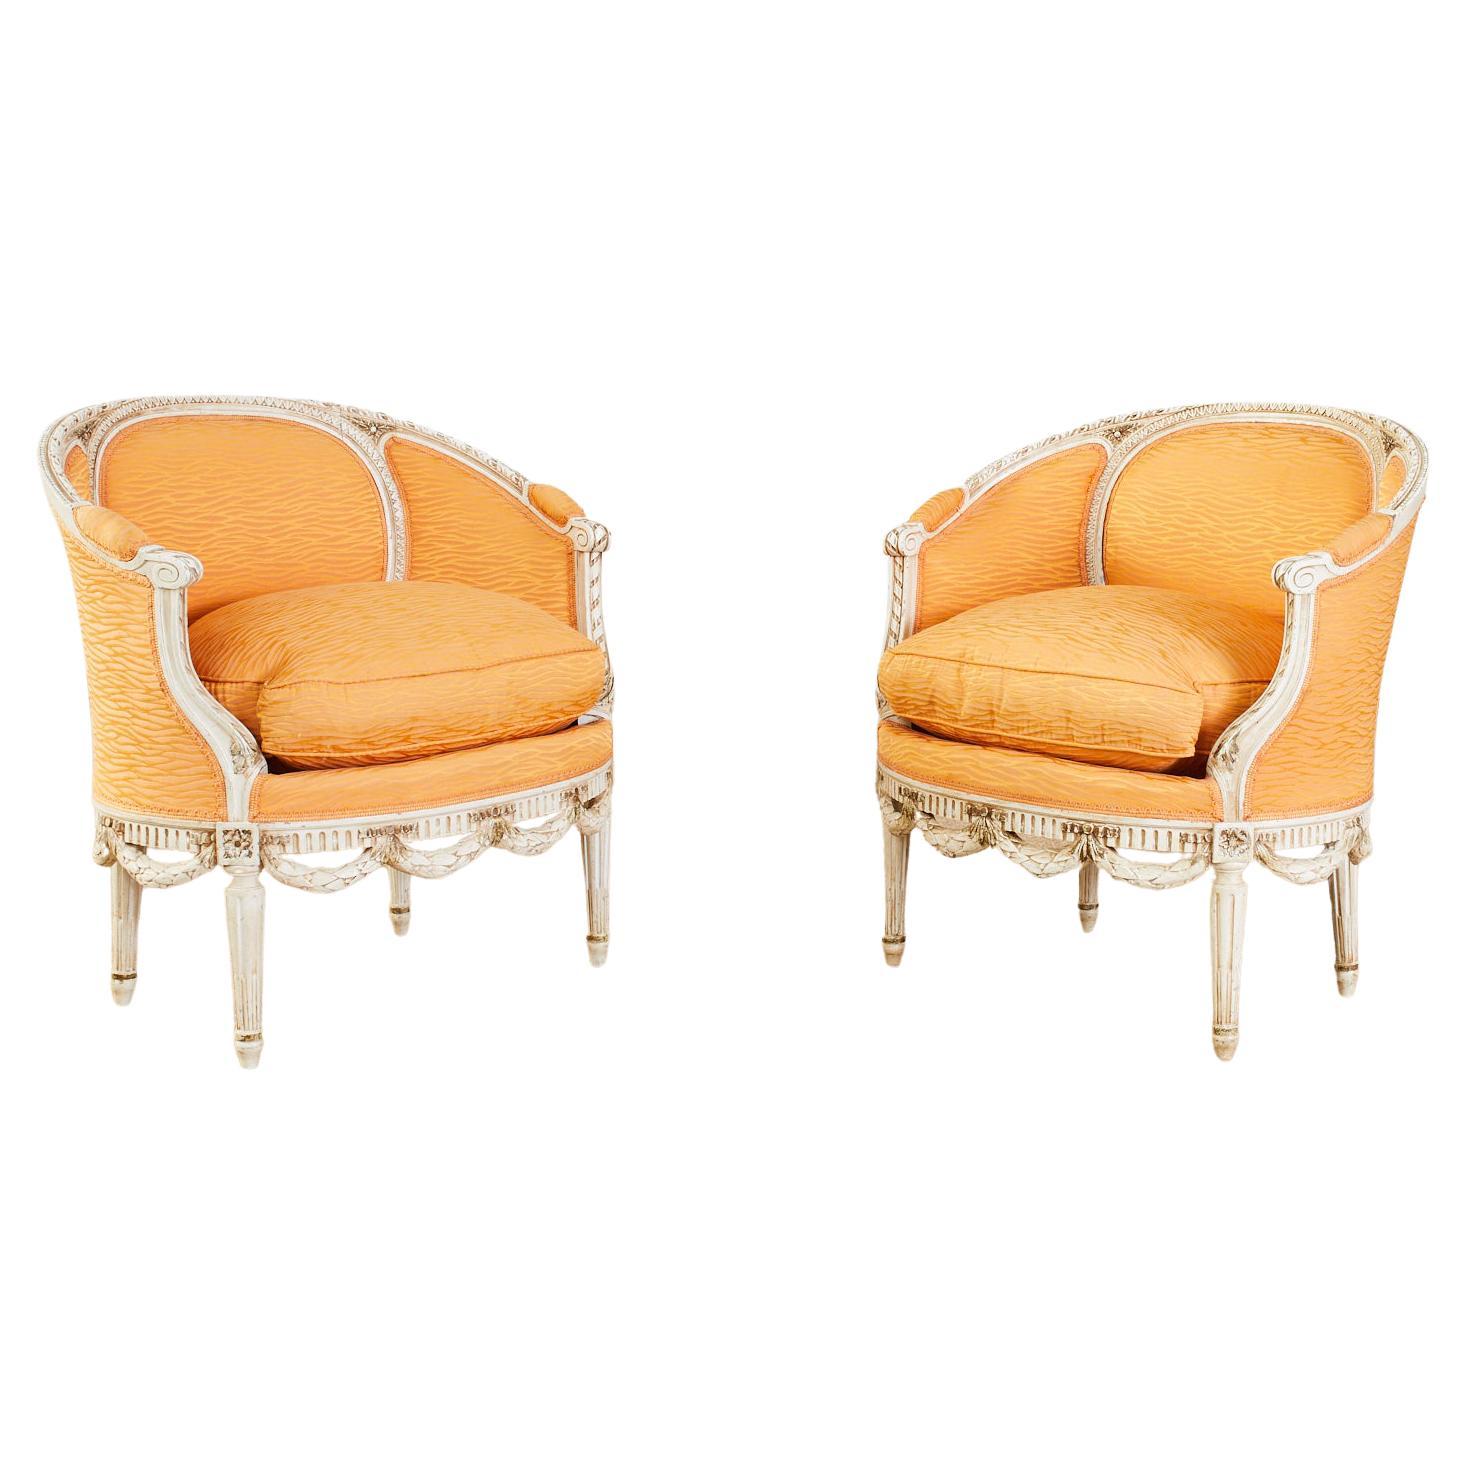 Pair of French Louis XVI Style Painted Round Bergere Armchairs